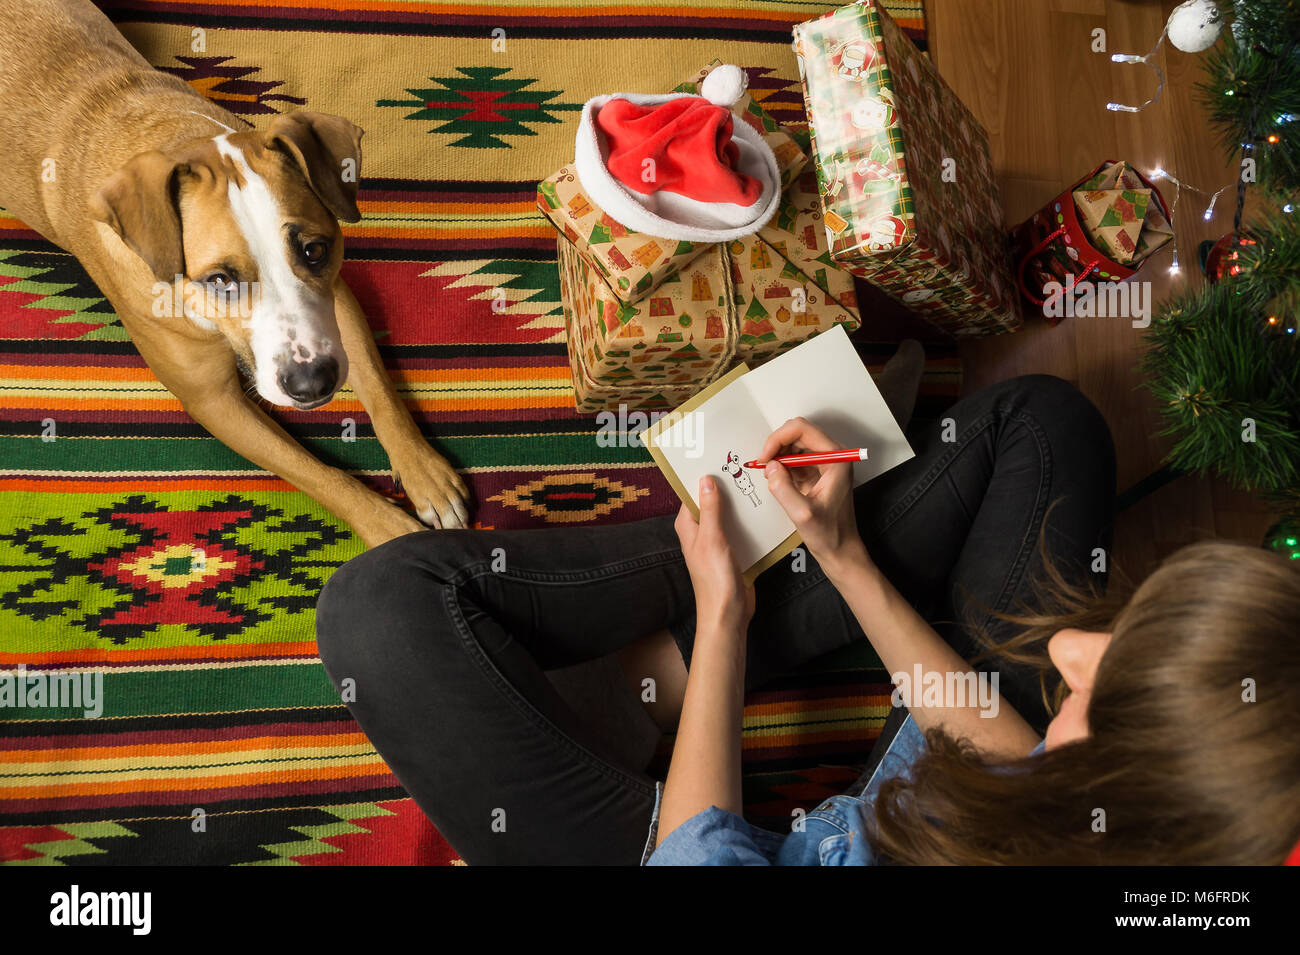 girl sits with pet dog and signs postcard  next to decorated fur tree and pile of new year presents packaged in beautiful packpaper Stock Photo